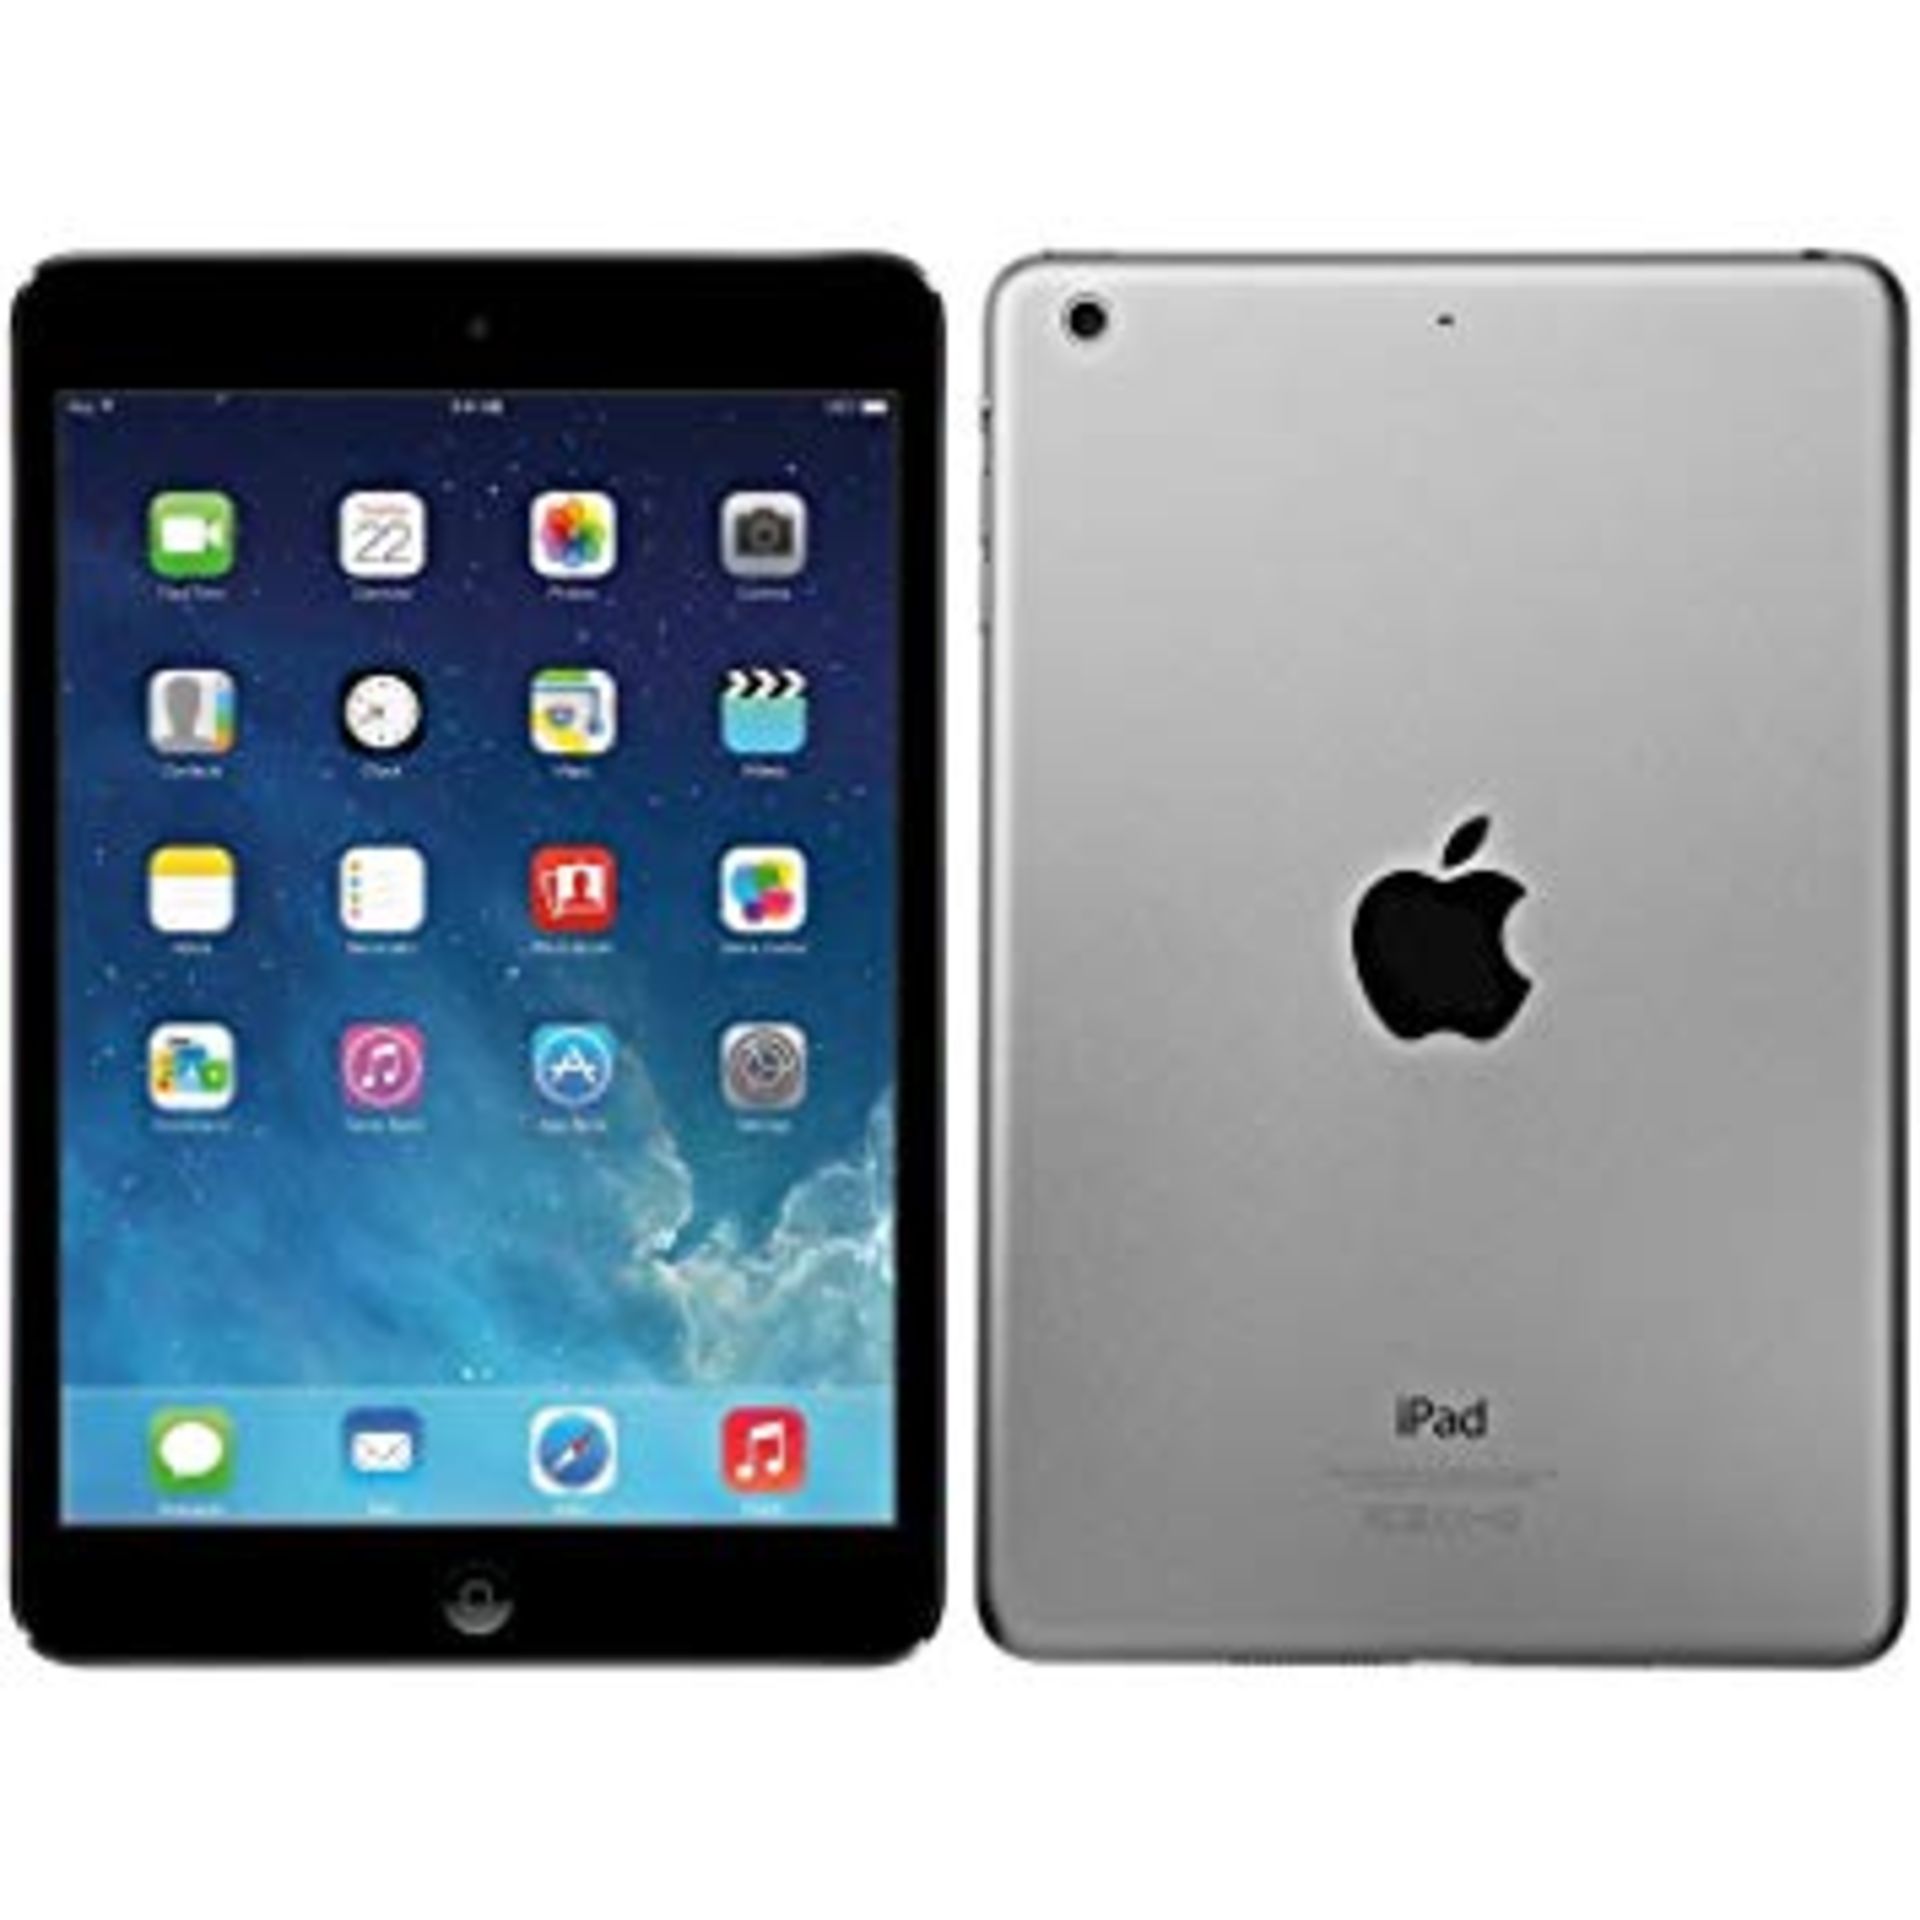 V Grade A Apple iPad Air 1 - 32GB With Wi-Fi & 4G - Item Is Available Approx 7 Working Days After